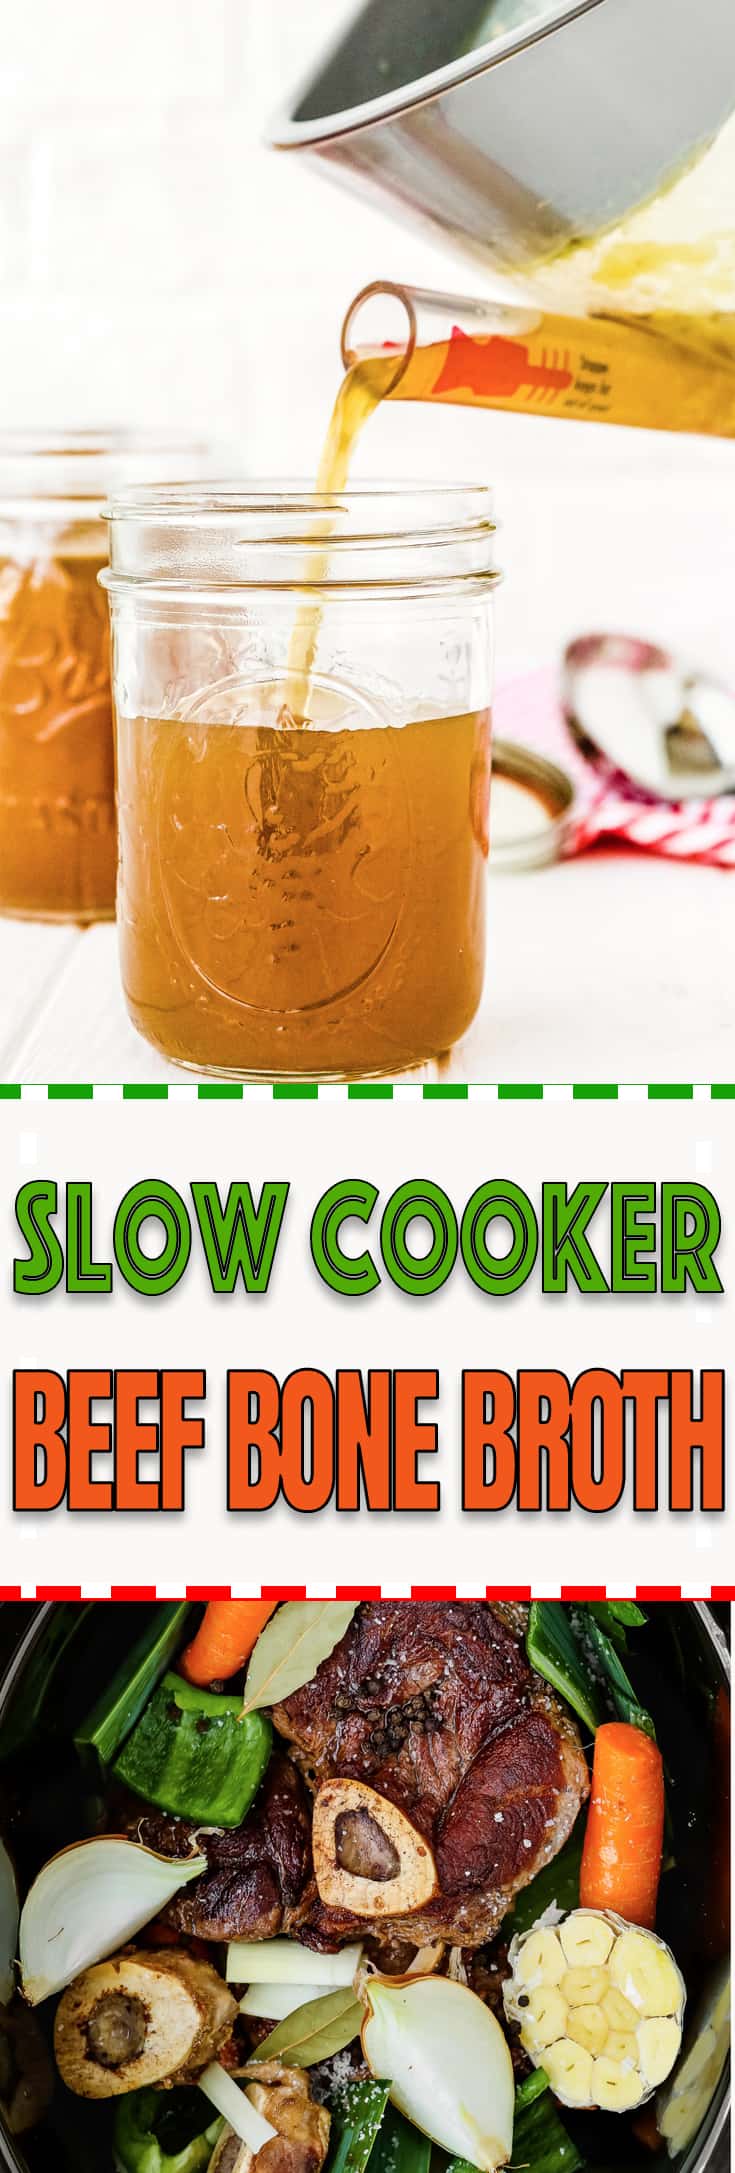 This Slow Cooker Beef Bone Broth is rich in nutrients and super tasty! It's easy to make and it's a money saver, too. Enjoy it on its own or use it to make your favorite stew, soup, and many other dishes. https://mommyshomecooking.com